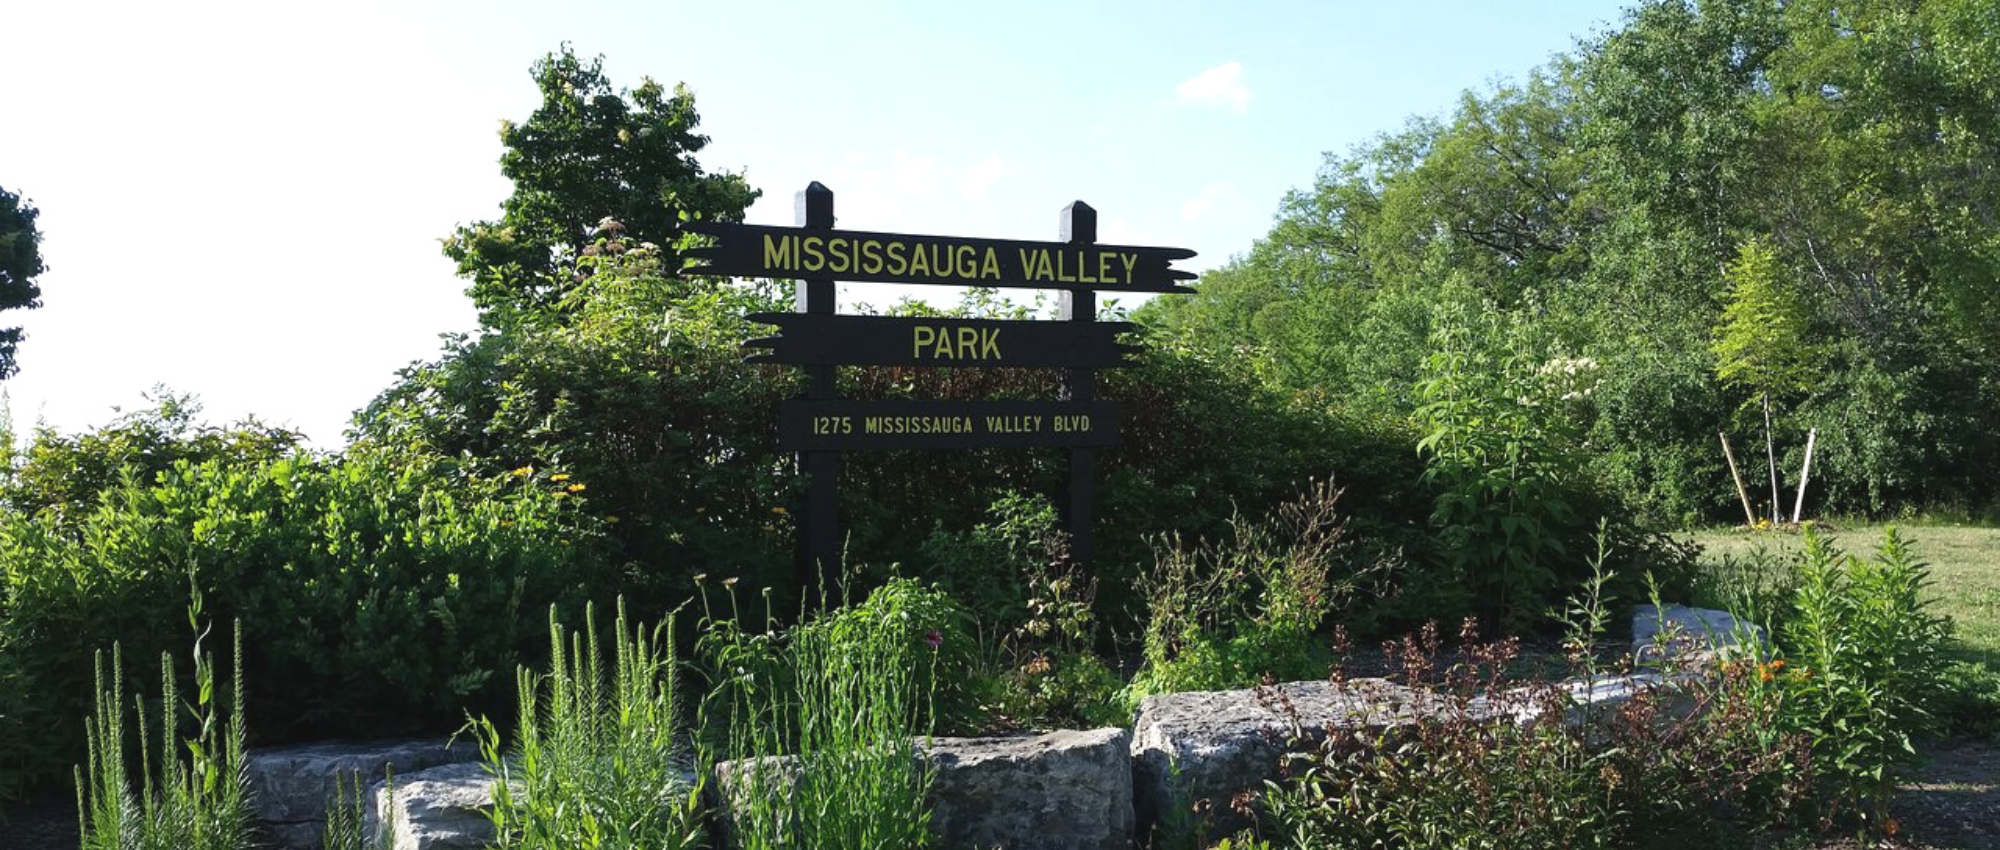 mississauga valley park sign